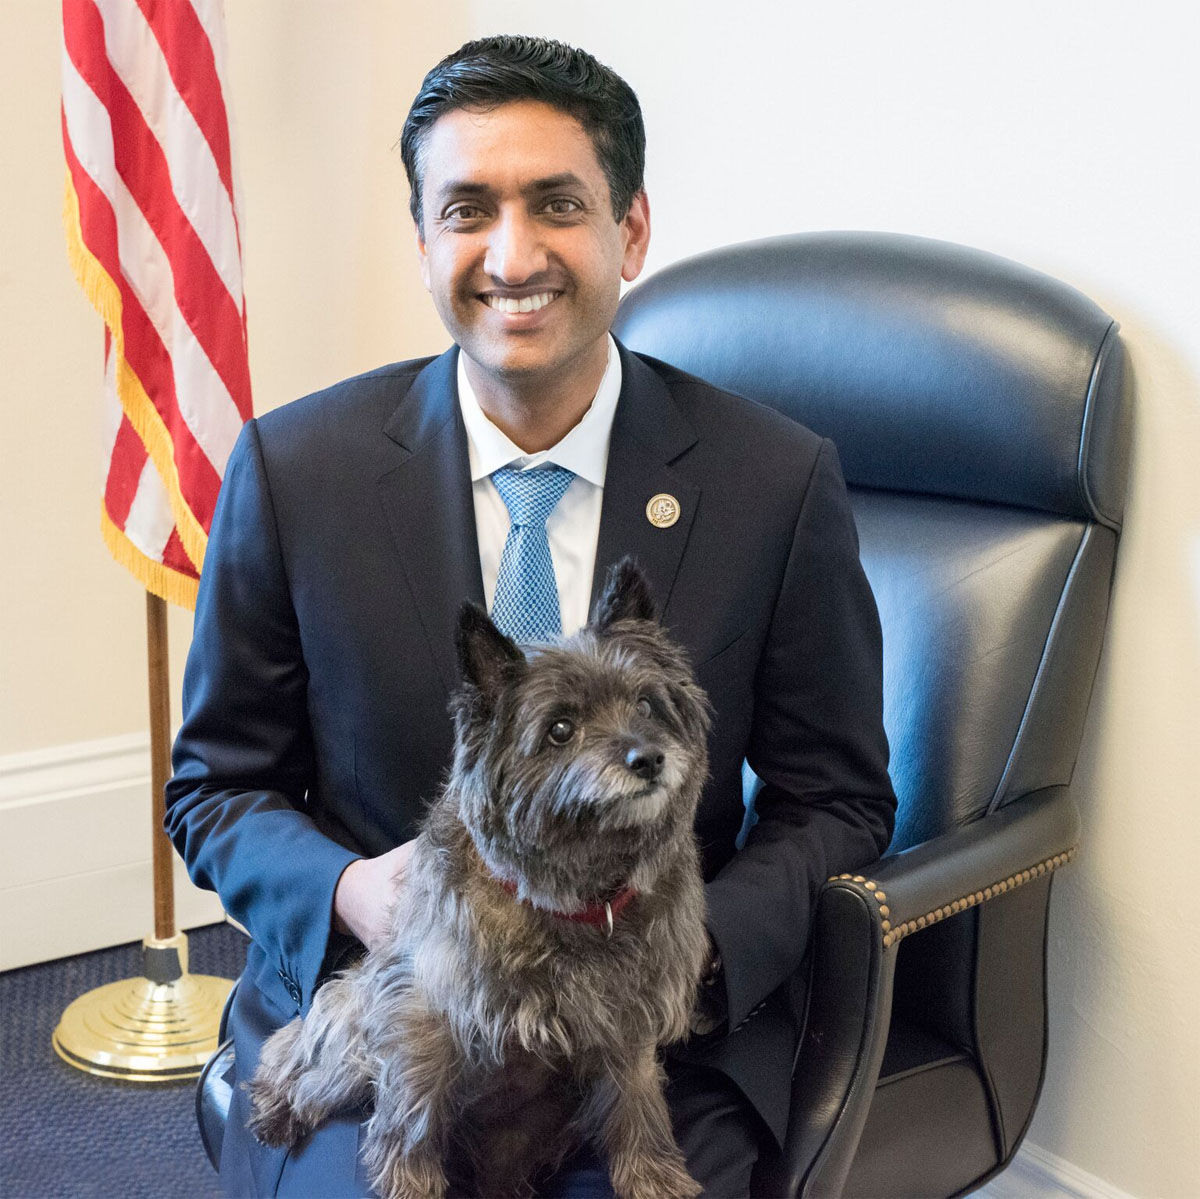 Rep. Ro Khanna, D-Pa., and his scheduler Angela’s dog, Jillian. Little Jillian runs the show when she’s in the office and is known to be the office greeter. (Courtesy Humane Rescue Alliance)